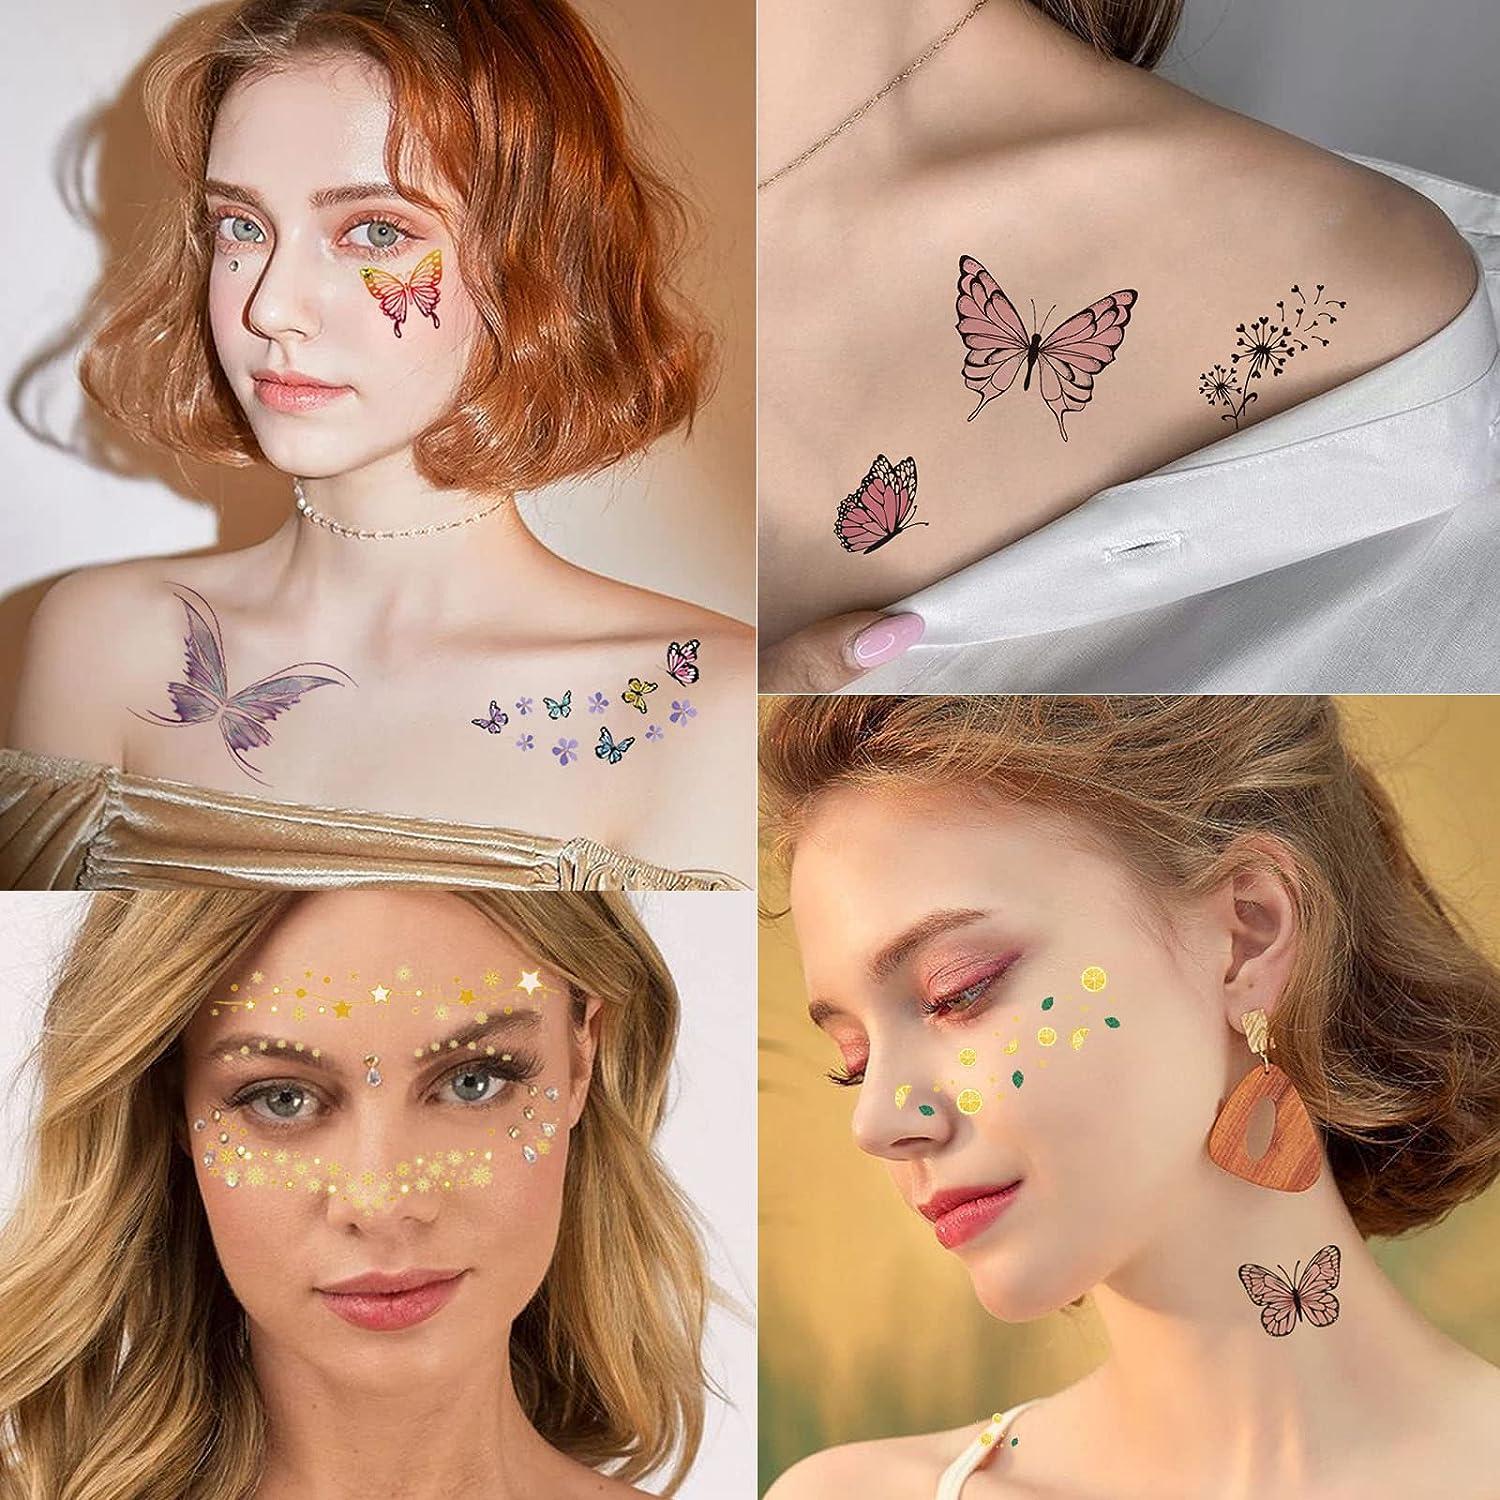 PROFESSIONAL CRYSTAL FACE Tattoo Temporary Eye Gems Makeup Stickers Cosplay  $5.34 - PicClick AU